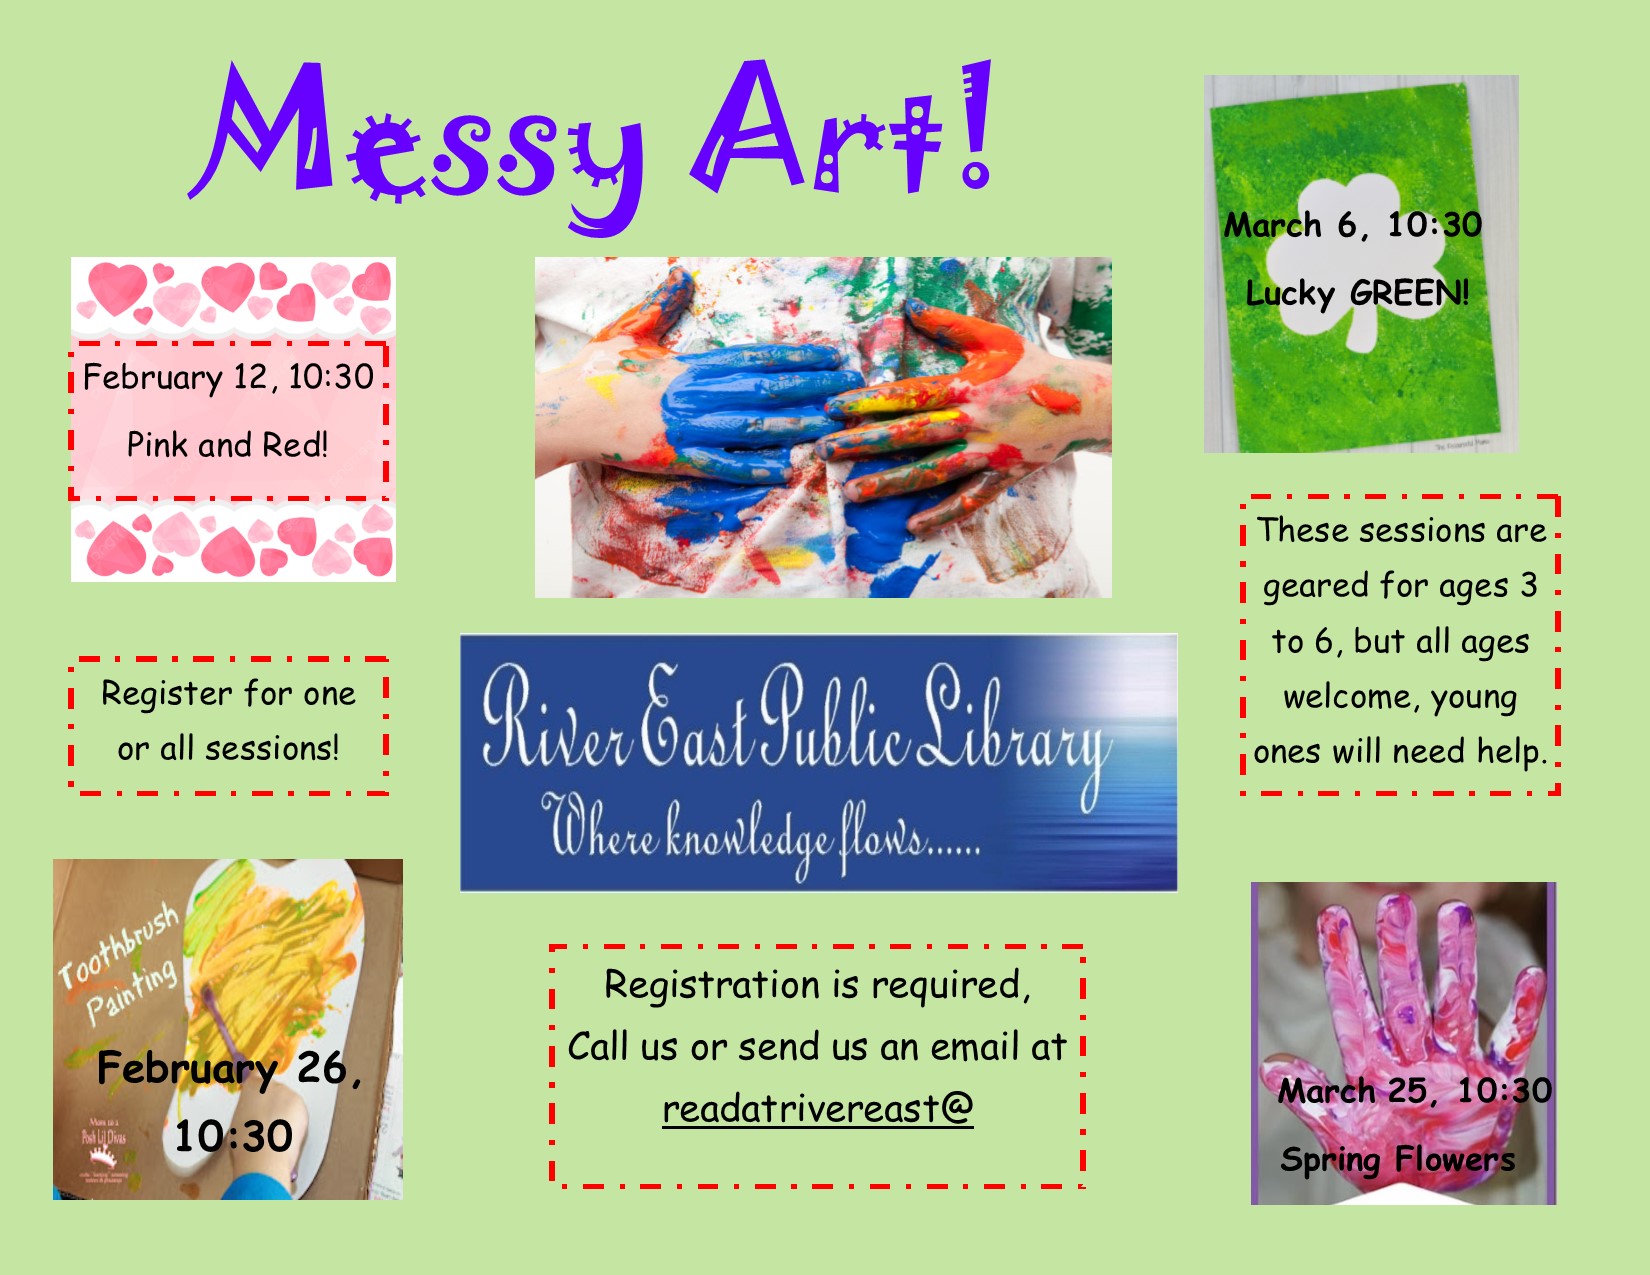 Poster advertising our upcoming messy art program